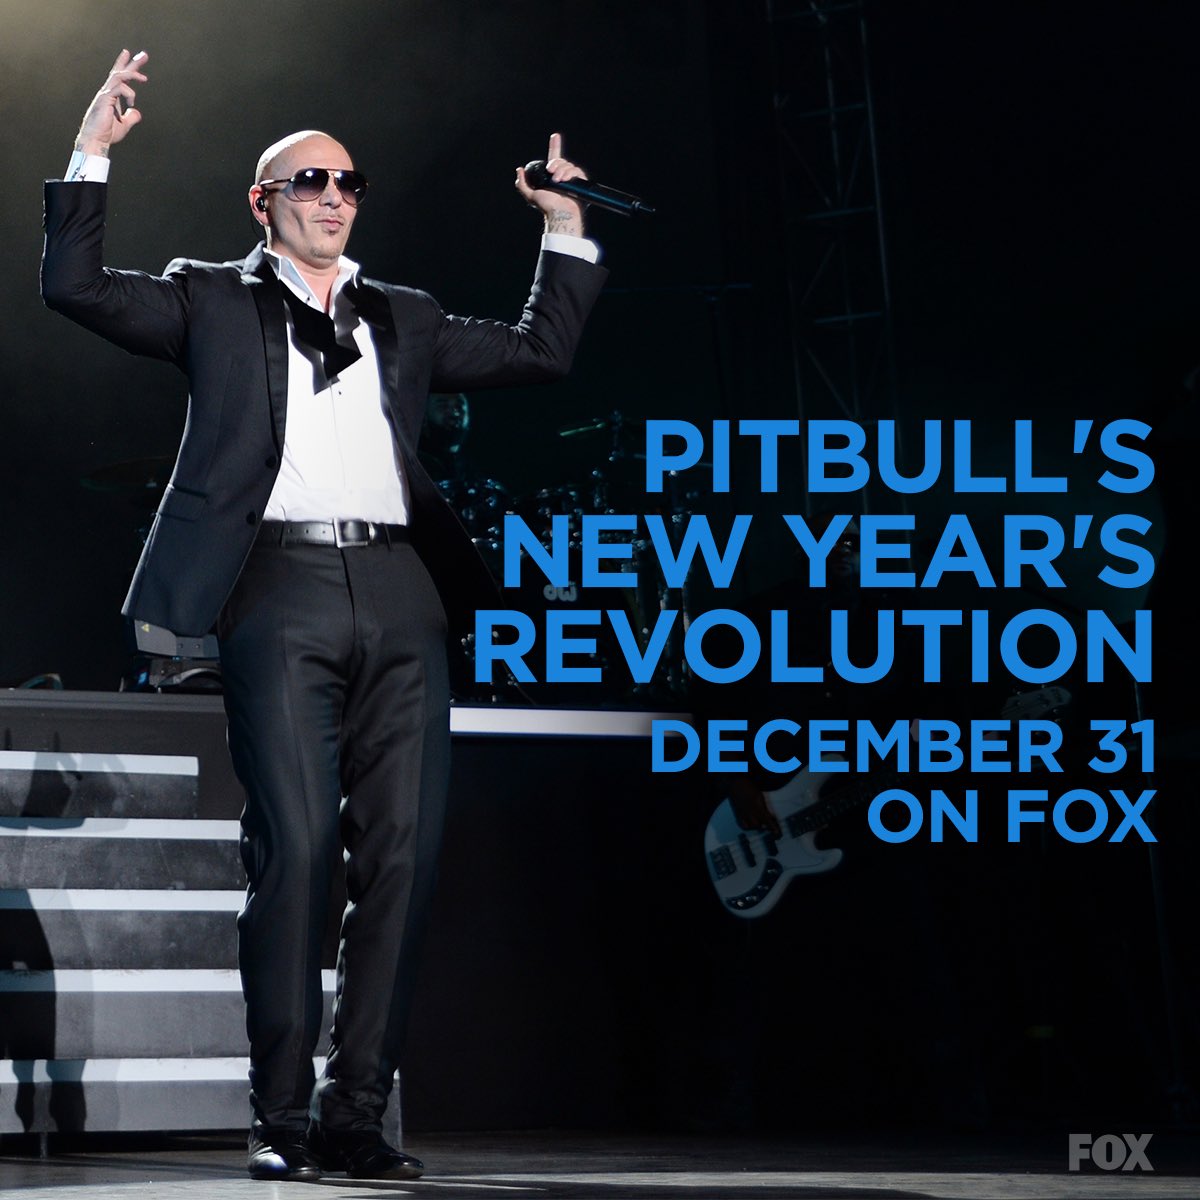 Going BIG for #PitbullNYE 2016. Who should party with me in Miami? https://t.co/NW604bpMdh